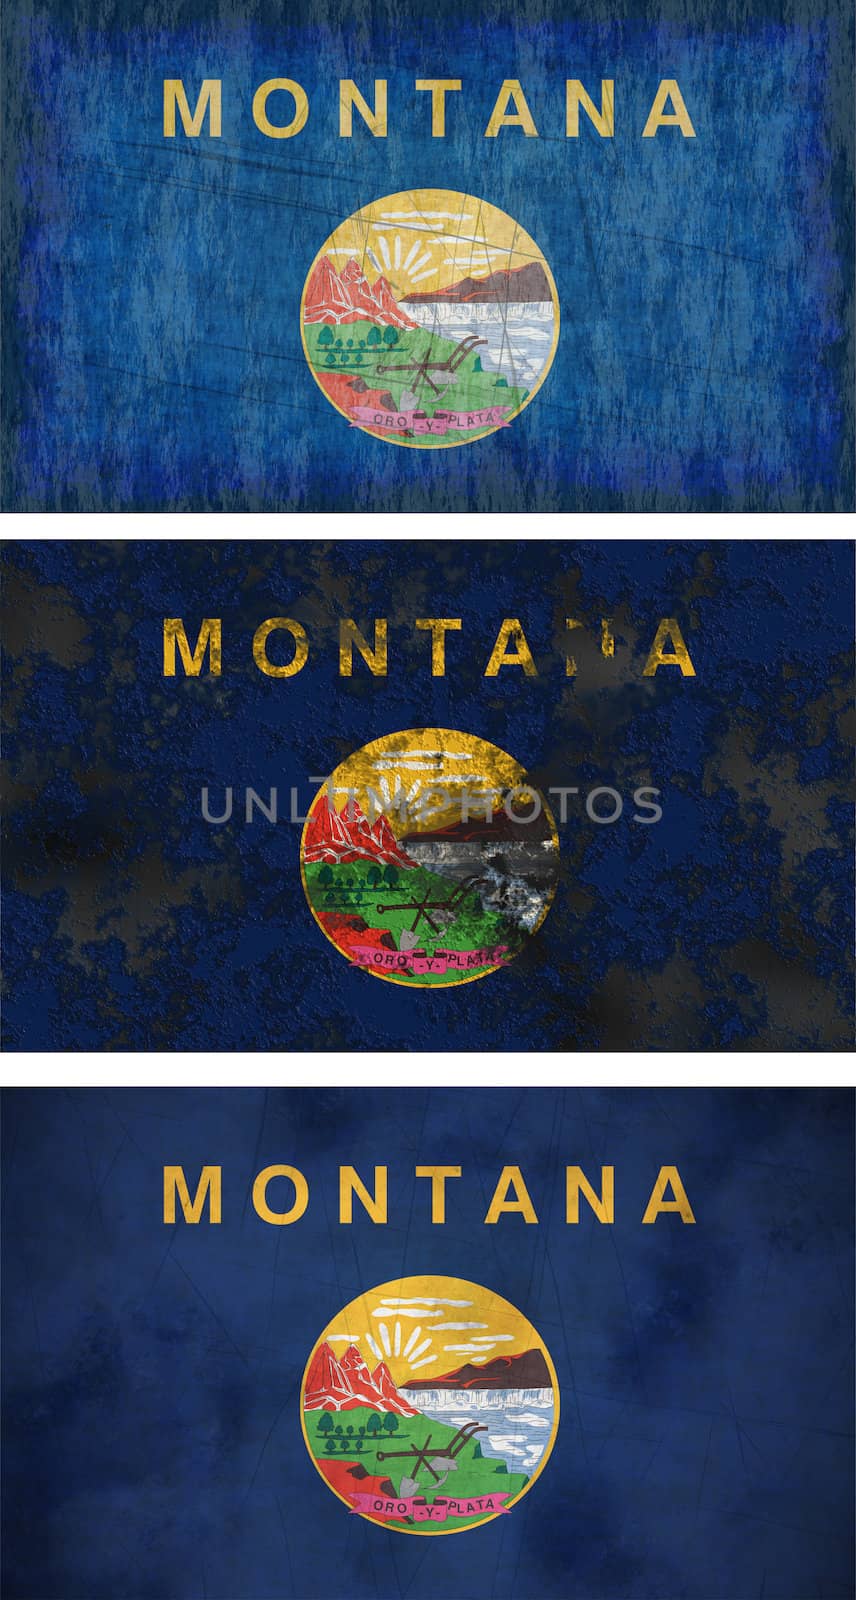 Great Image of the Flag of Montana